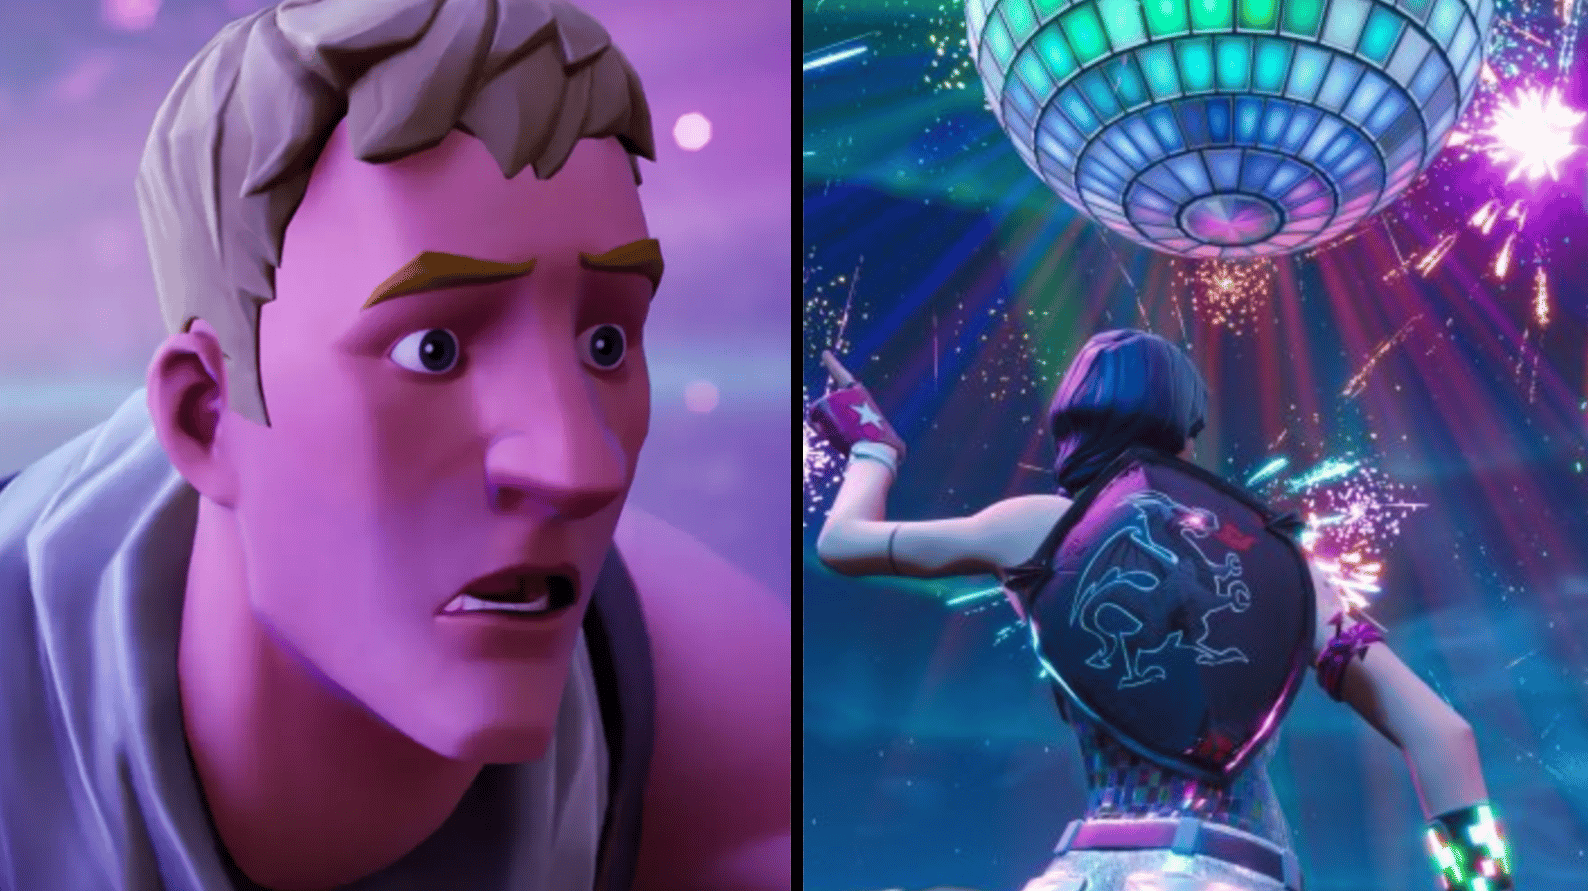 Fortnite S New Year S Celebration Event Appears To Be In Game Already Dexerto